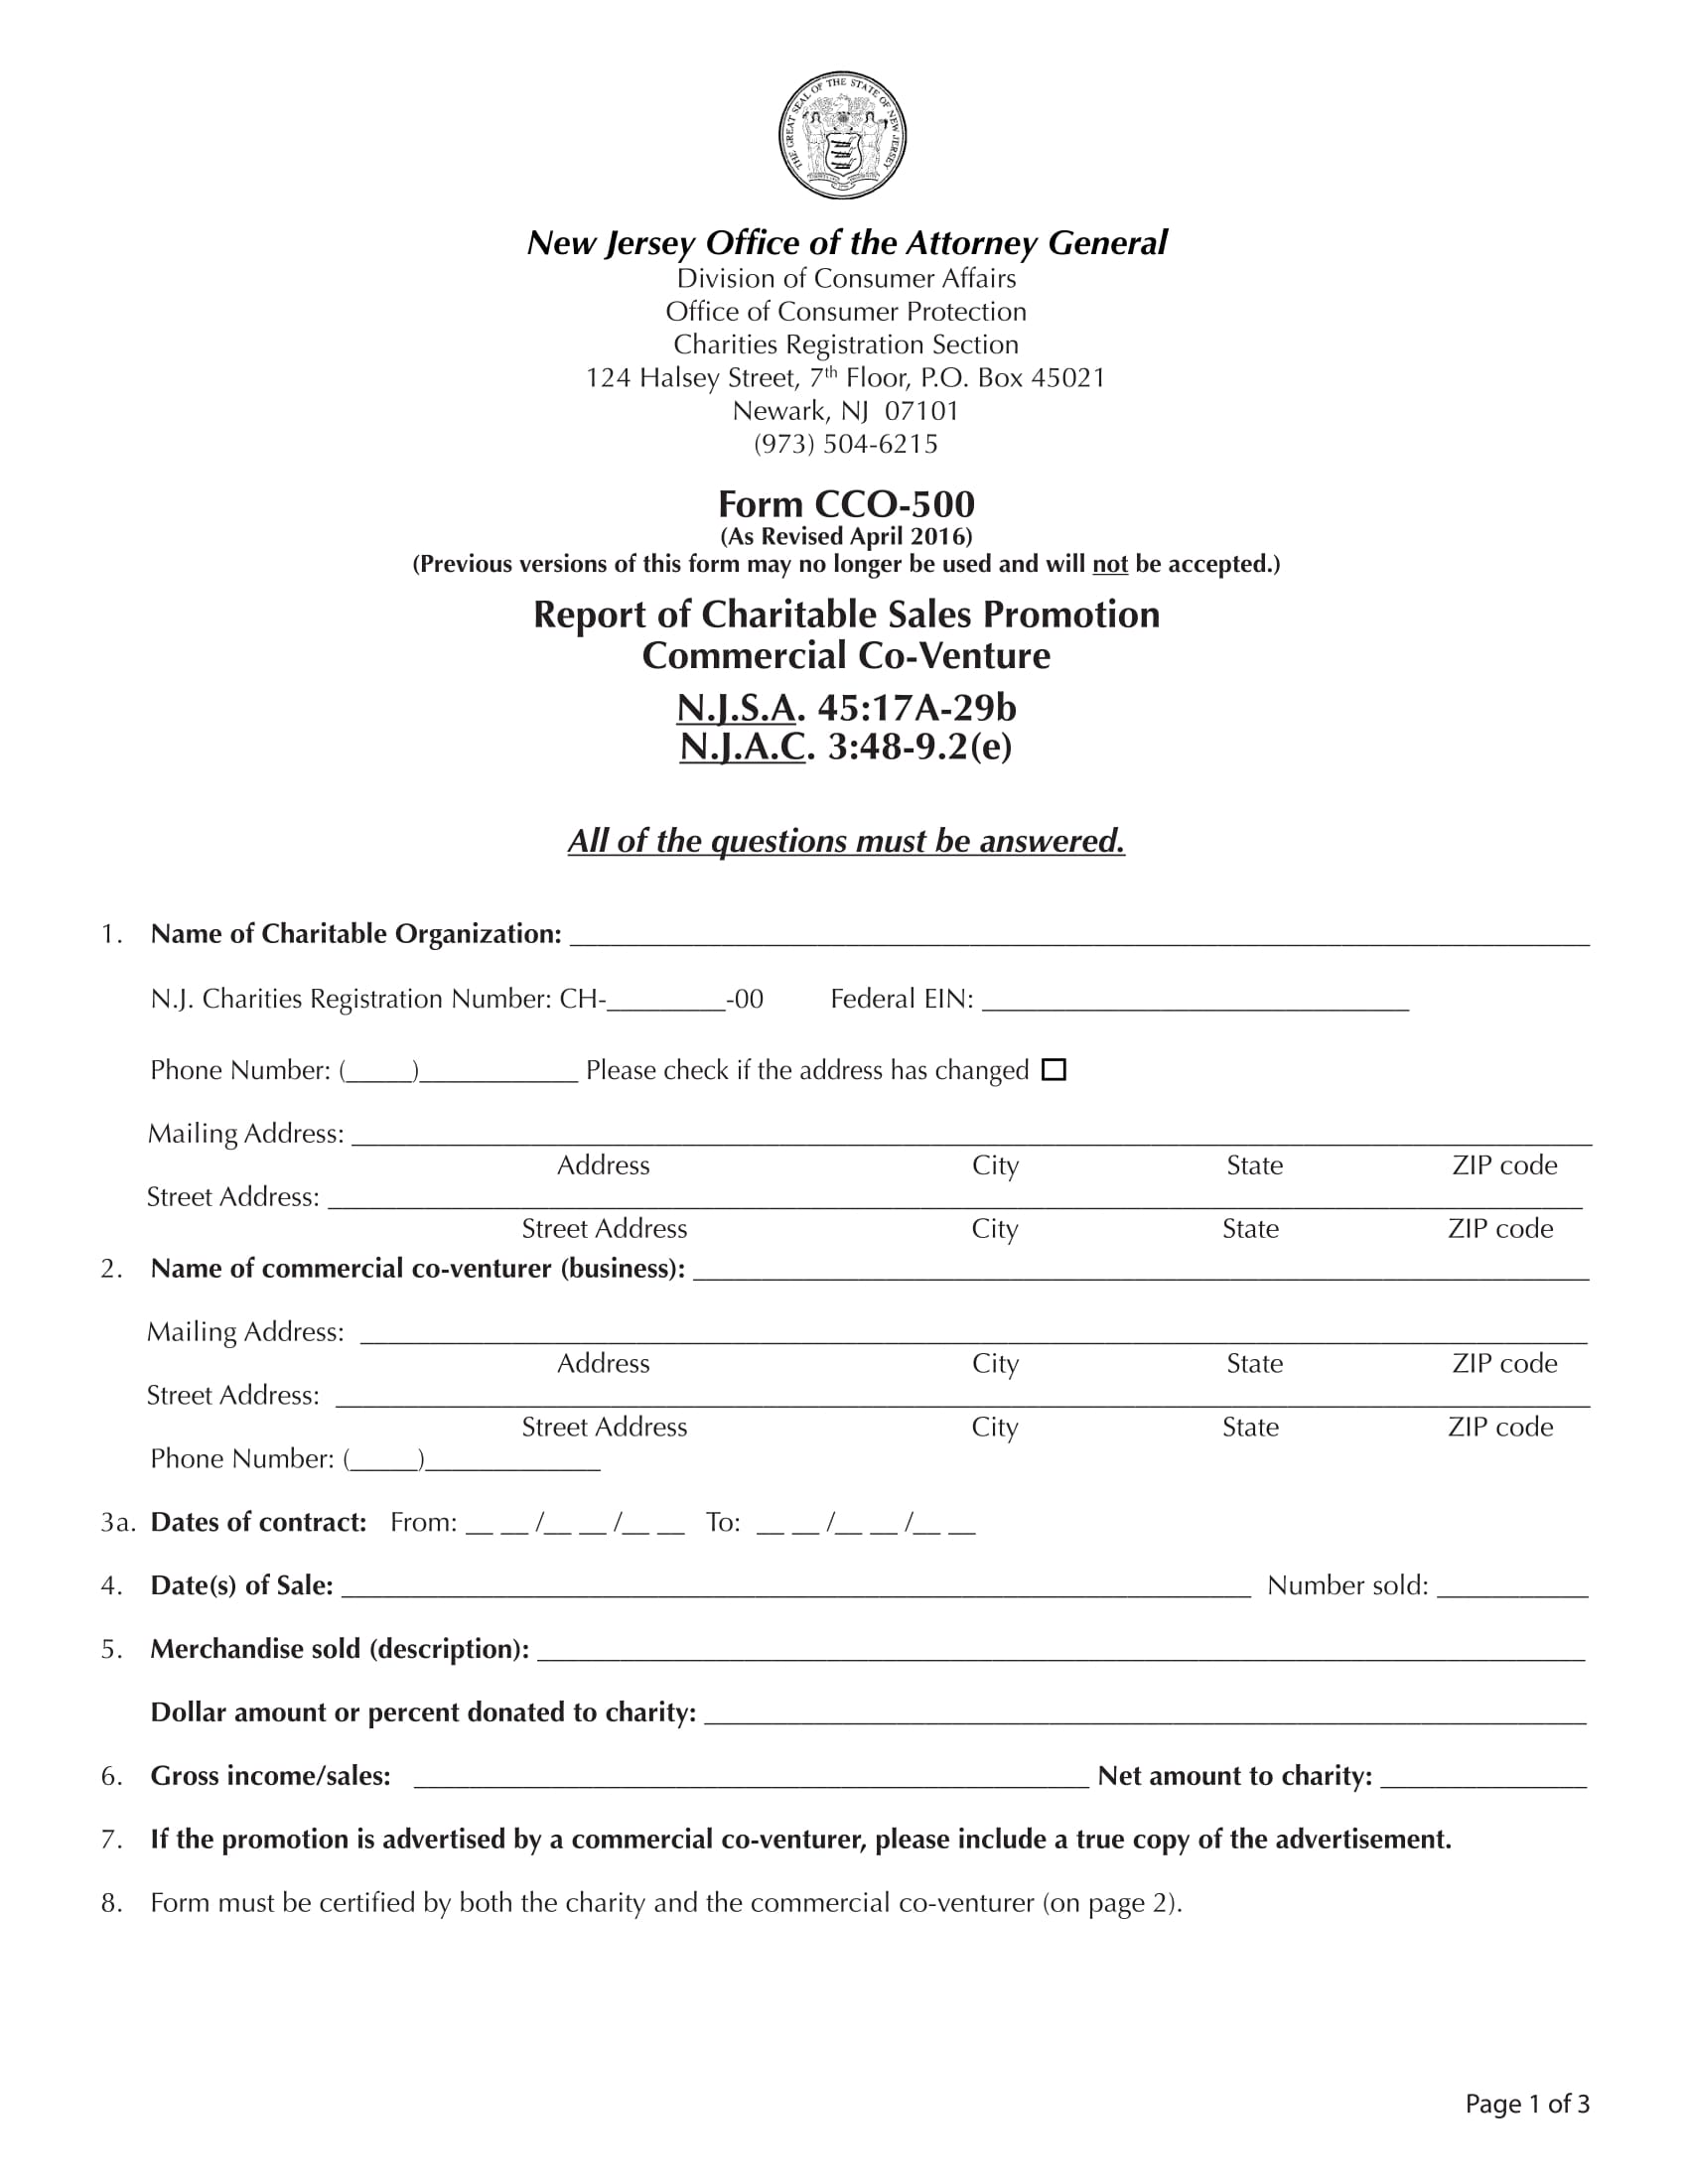 charitable sales promotion report form 1